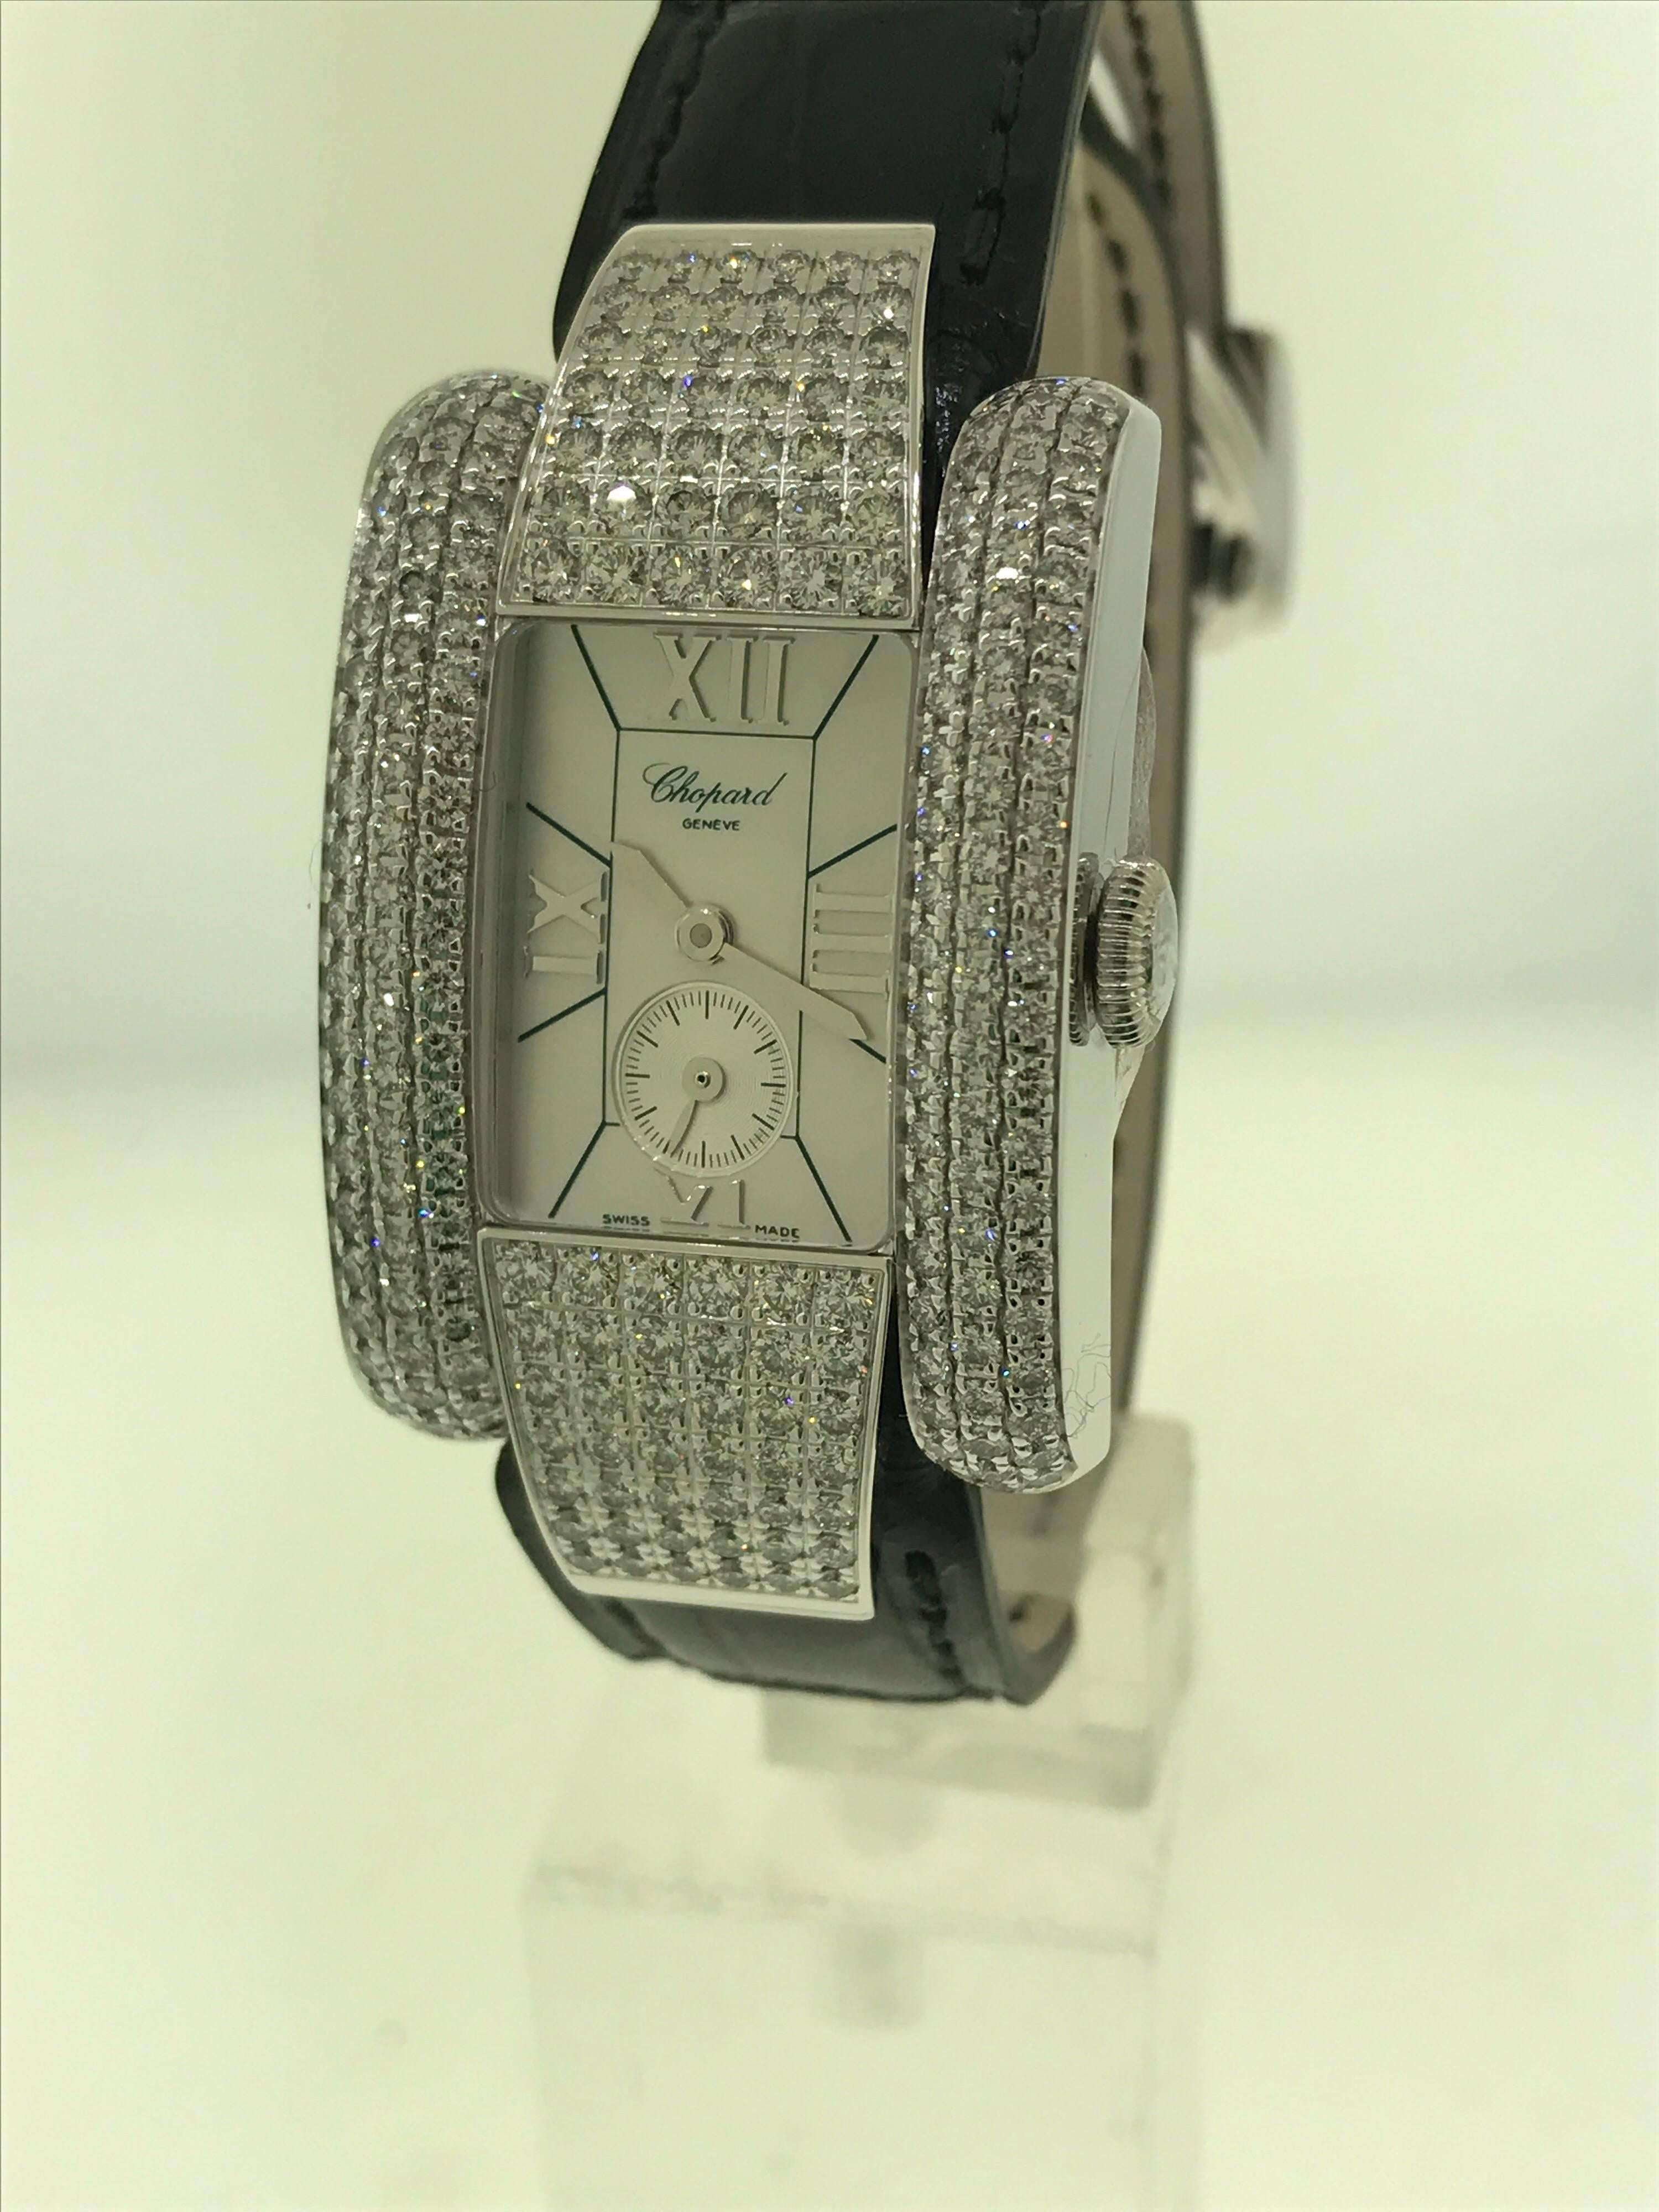 Chopard La Strada Lady's Watch

Model Number: 41/6847-1001

100% Authentic

Brand New

Comes with original Chopard box, certificate of authenticity and warranty, and instruction manual

18 Karat White Gold Case and Buckle  (49gr)

Sapphire